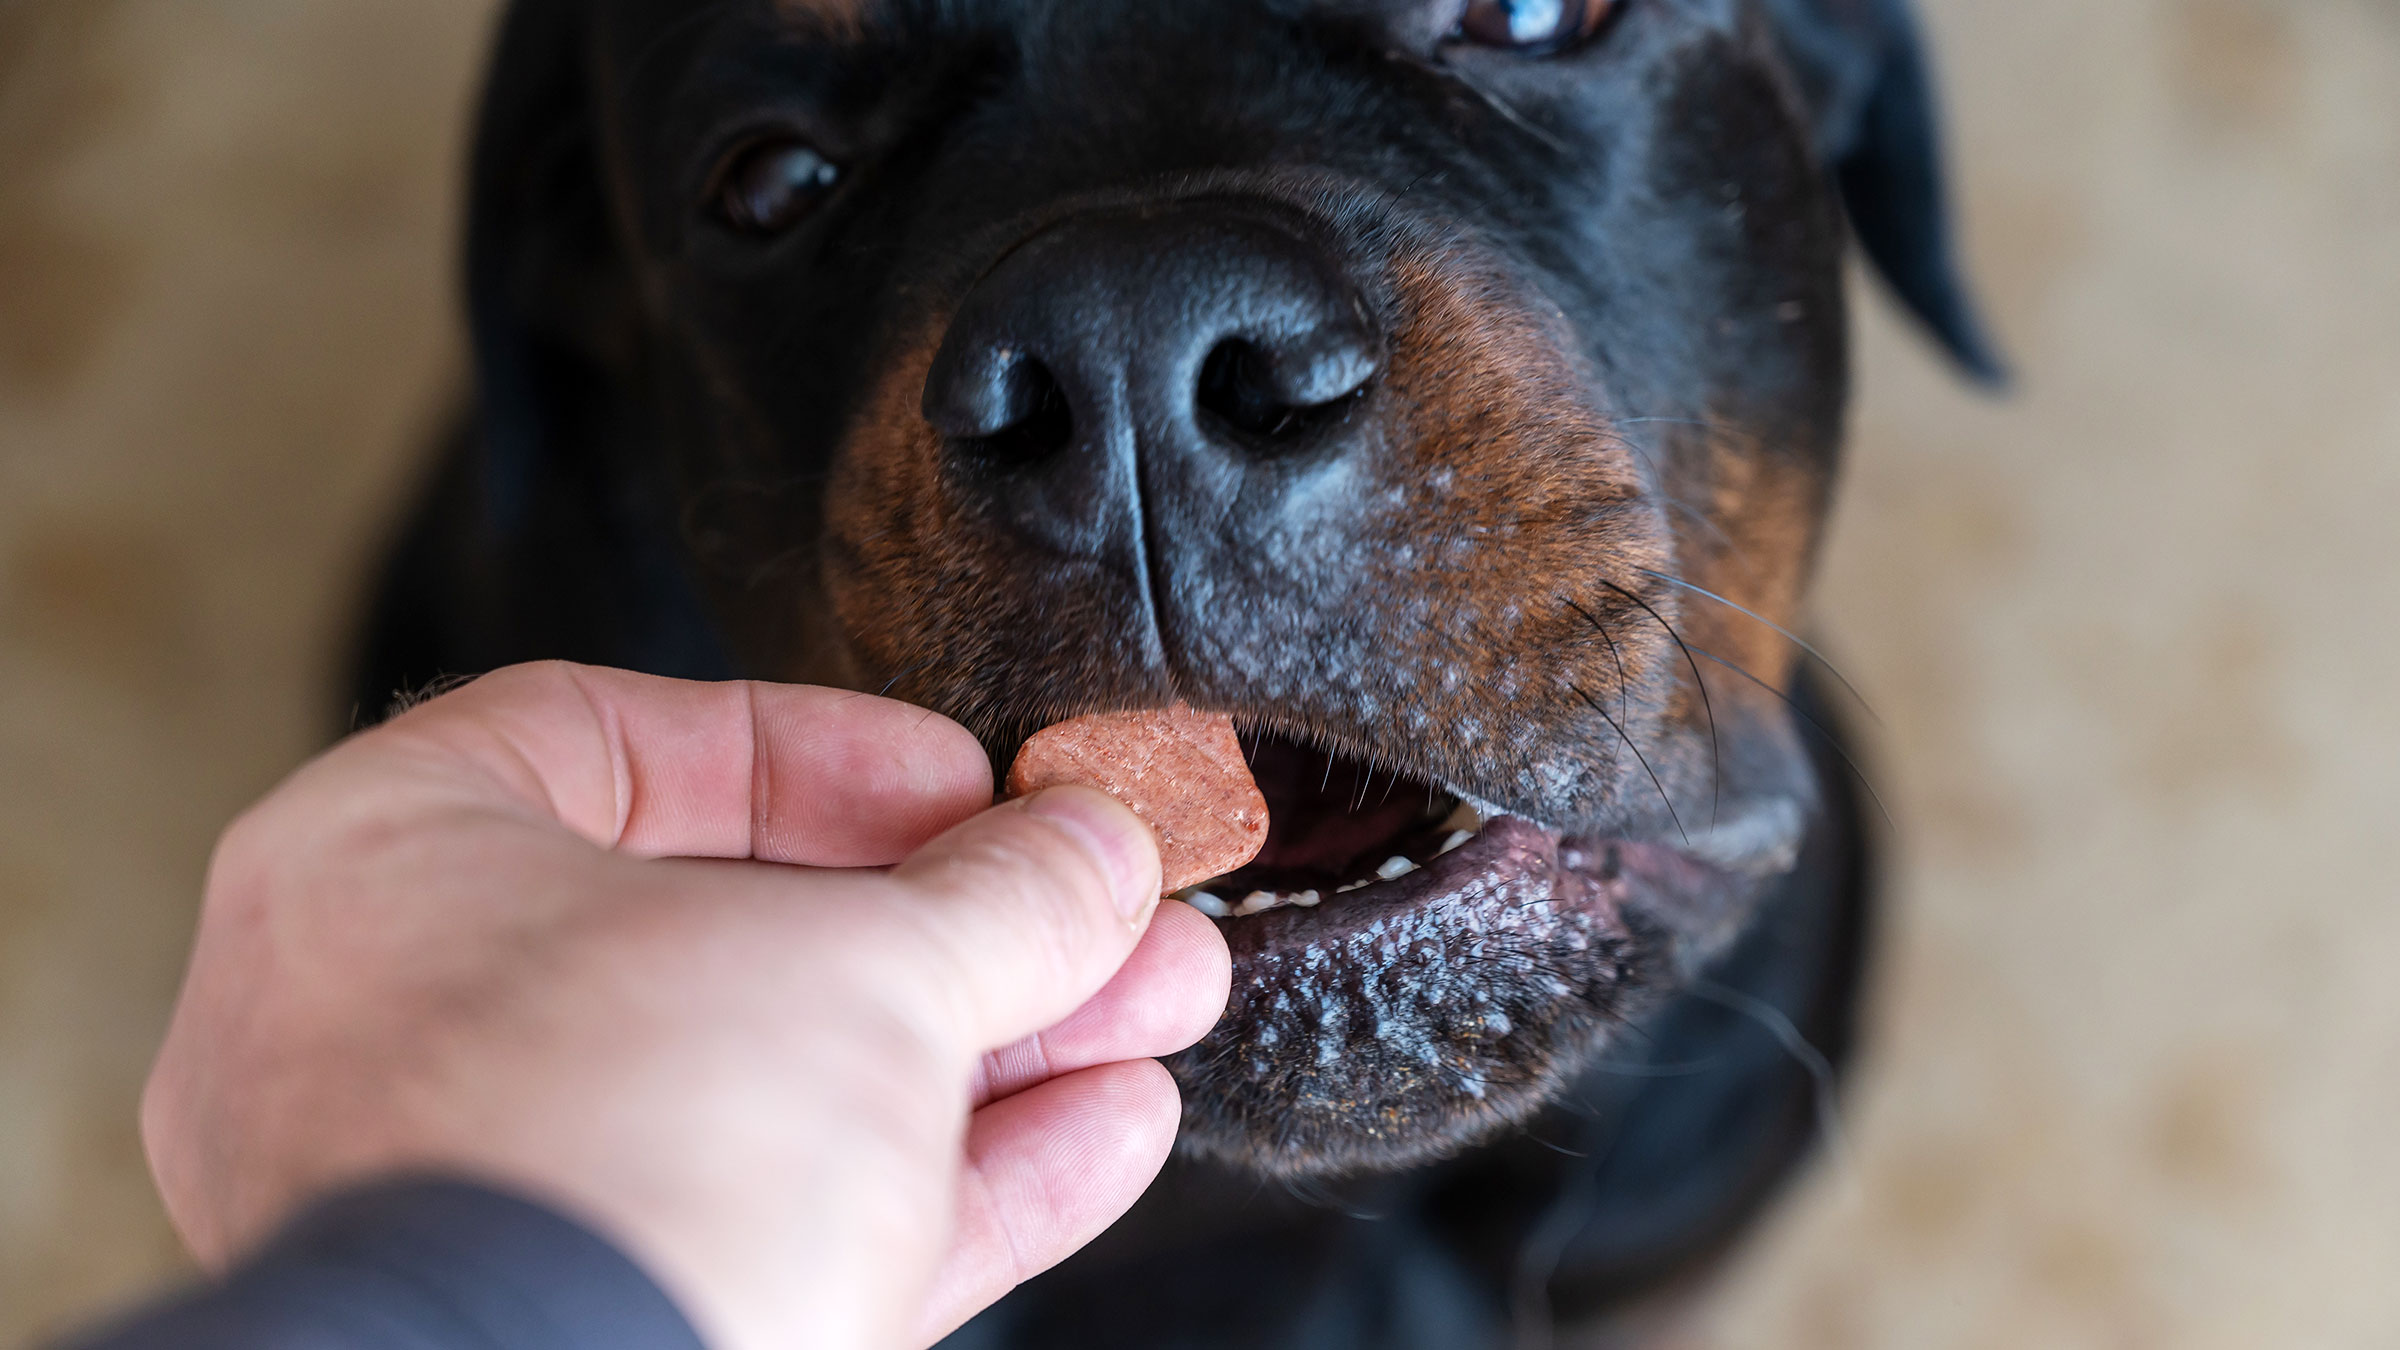 What Can Dogs Not Eat? (23 Toxic Foods To Avoid)